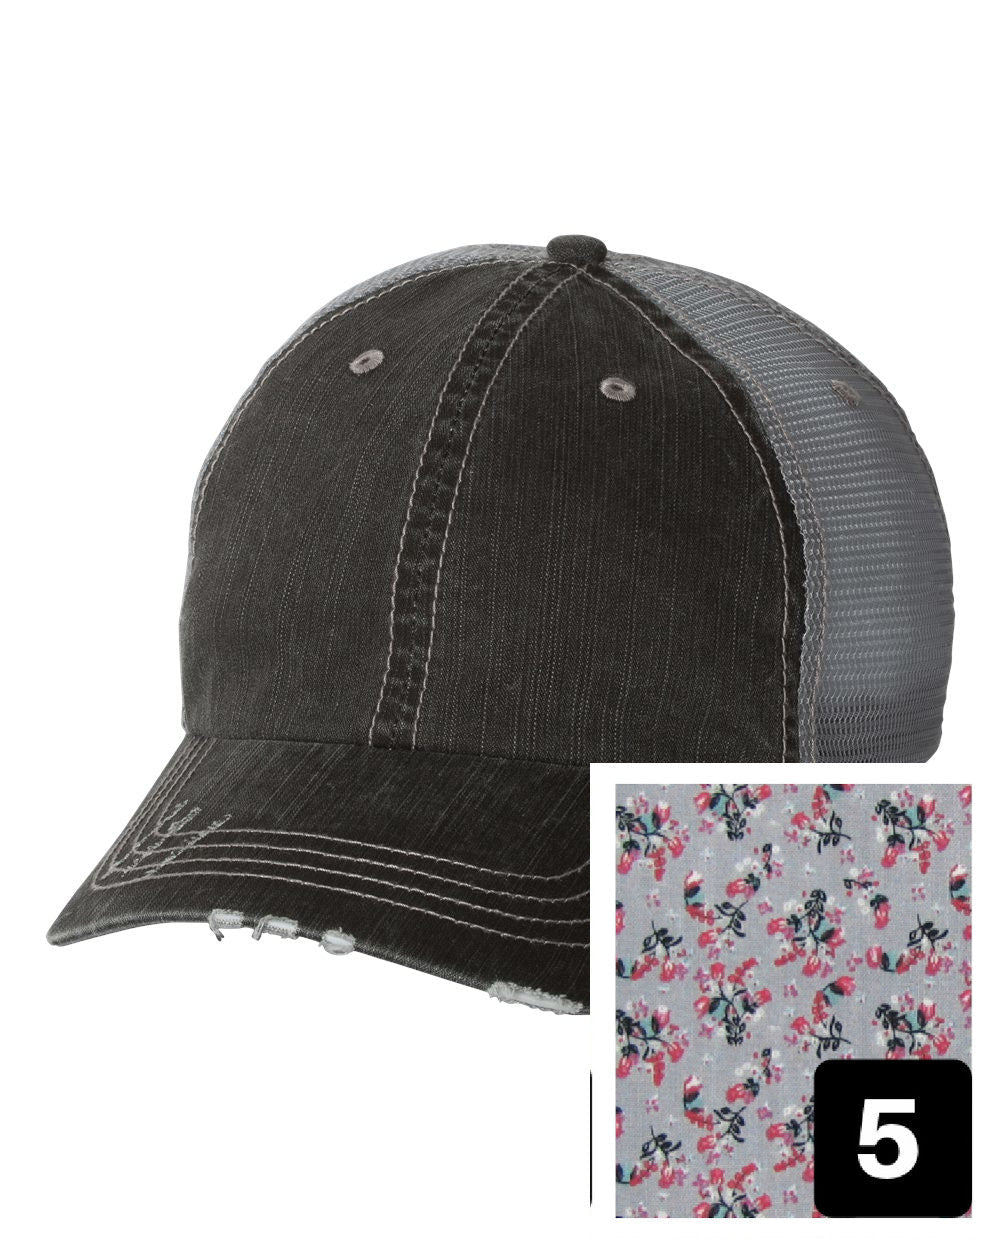 gray distressed trucker hat with purple and pink floral fabric state of New Hampshire